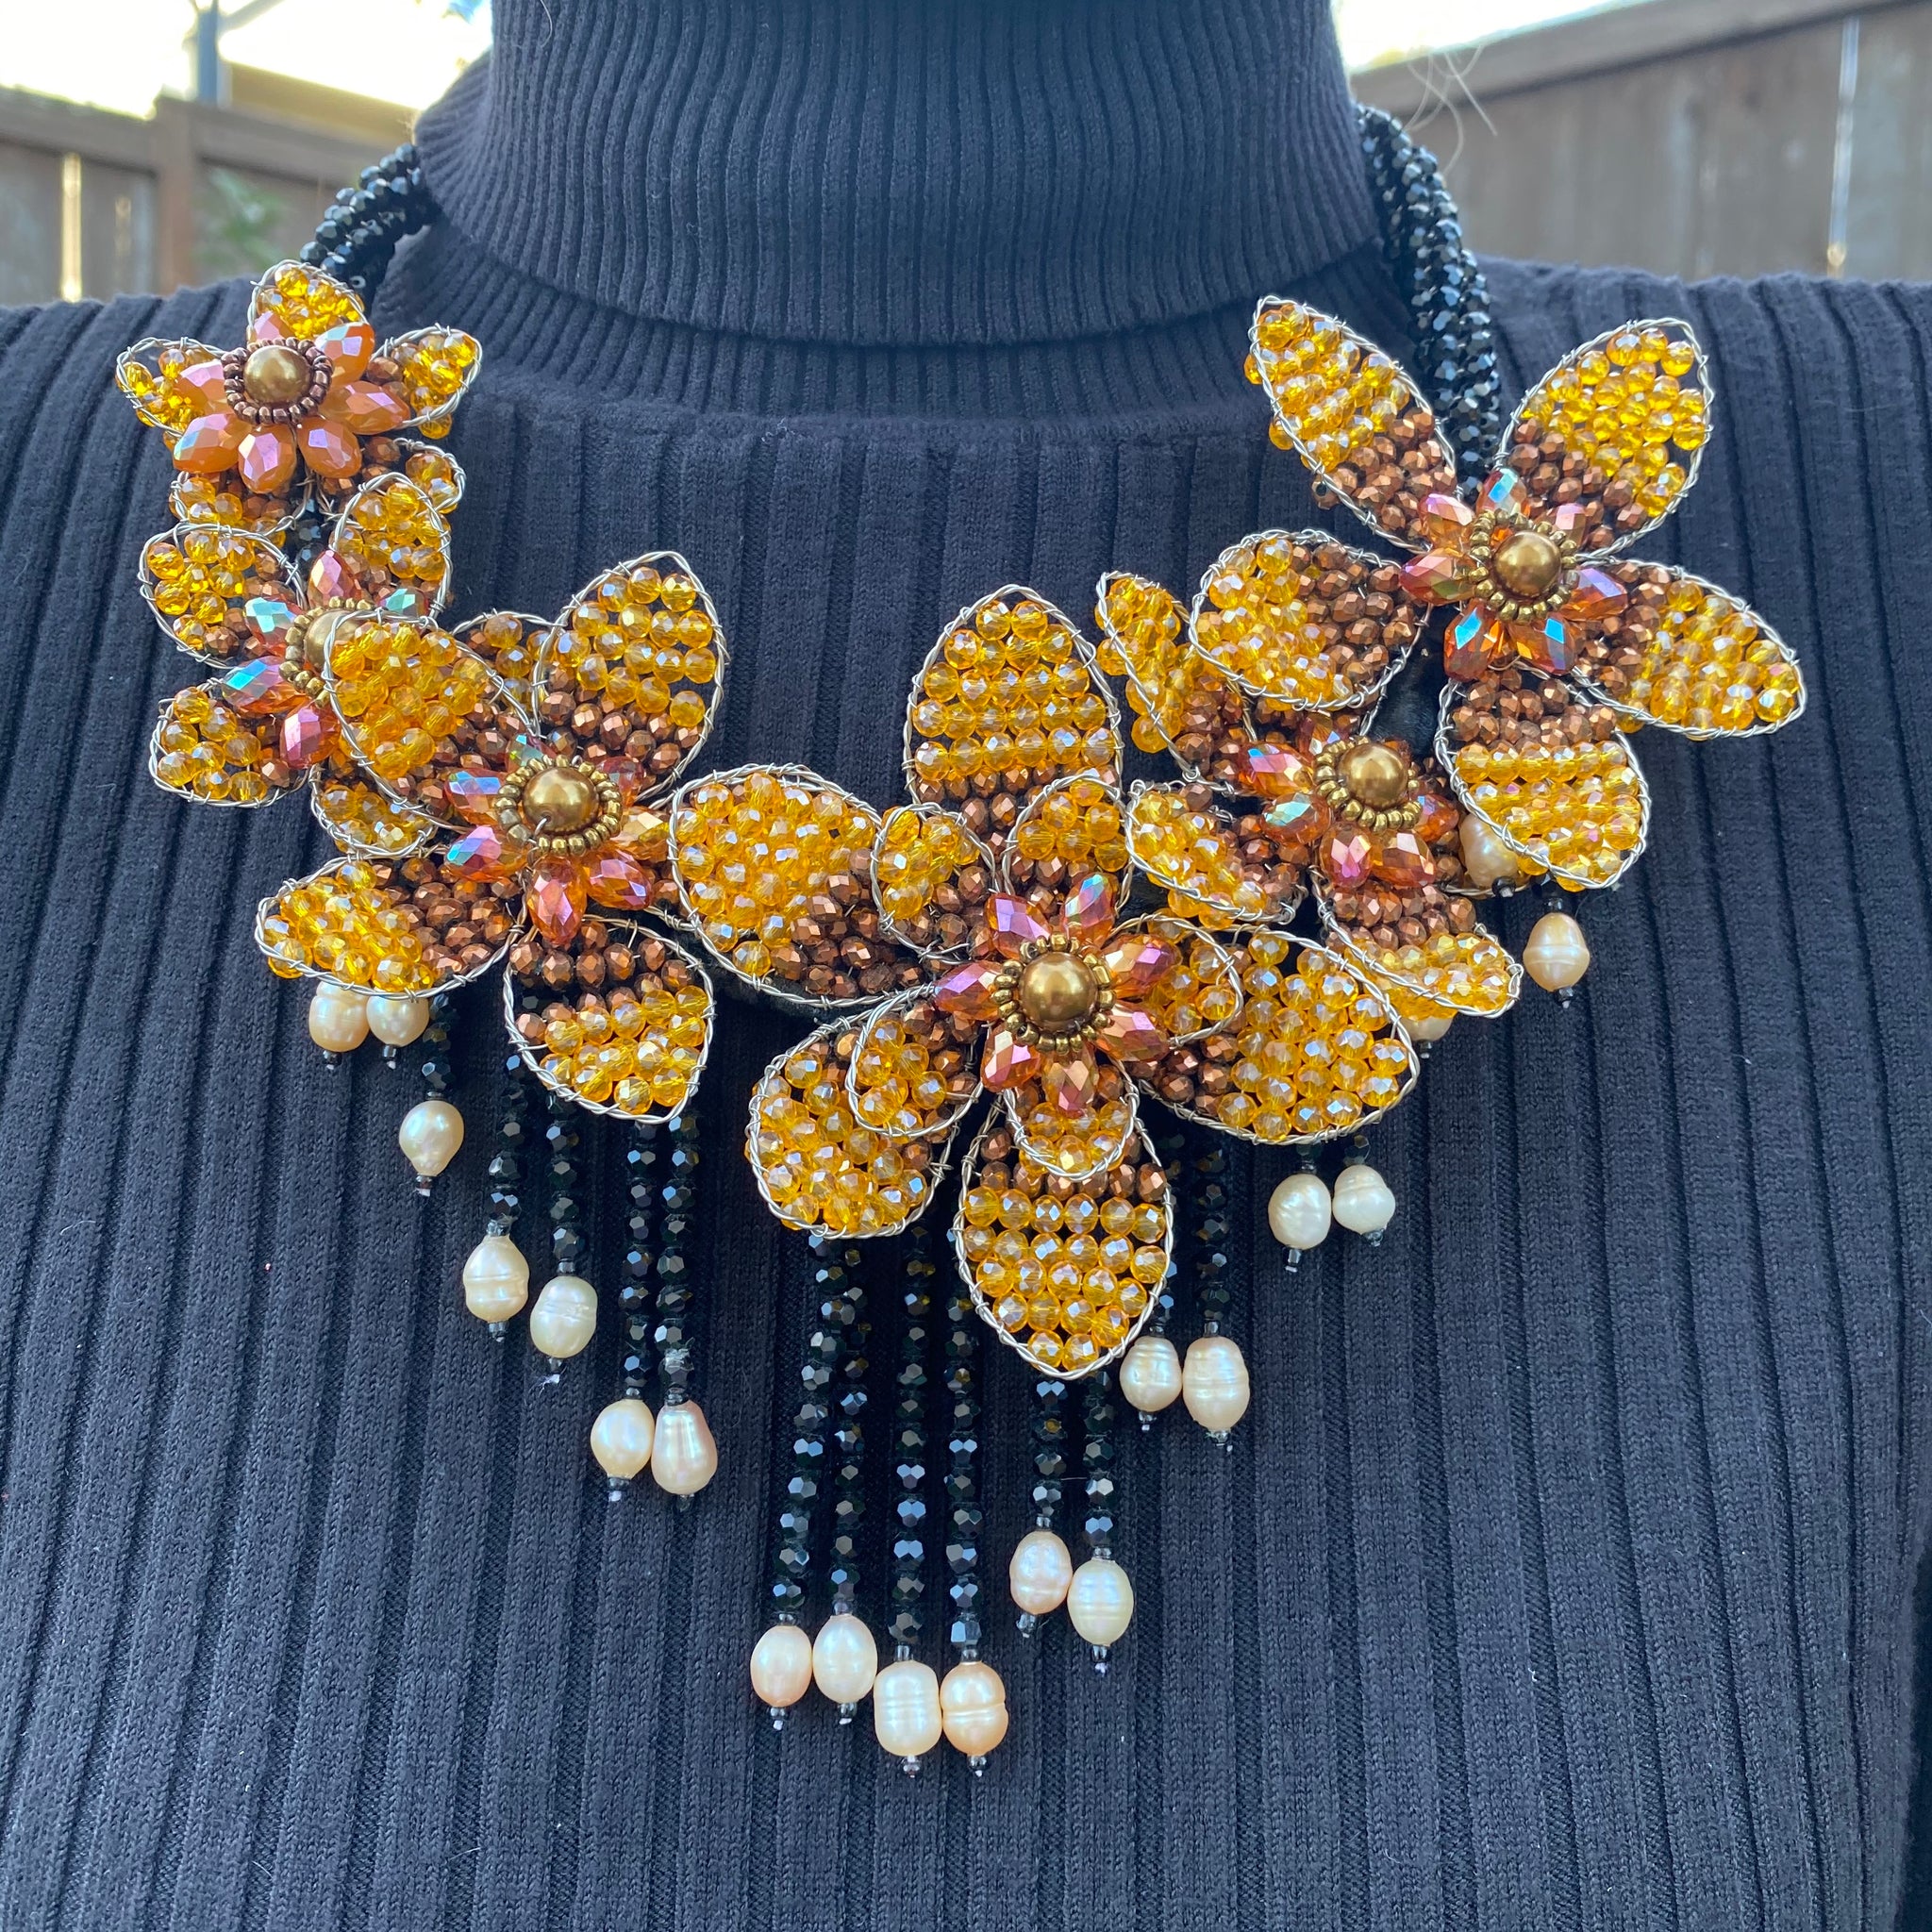 Unique Necklace 20" Statement Handcrafted Yellow Floral Beads Tassels Pearl Choker